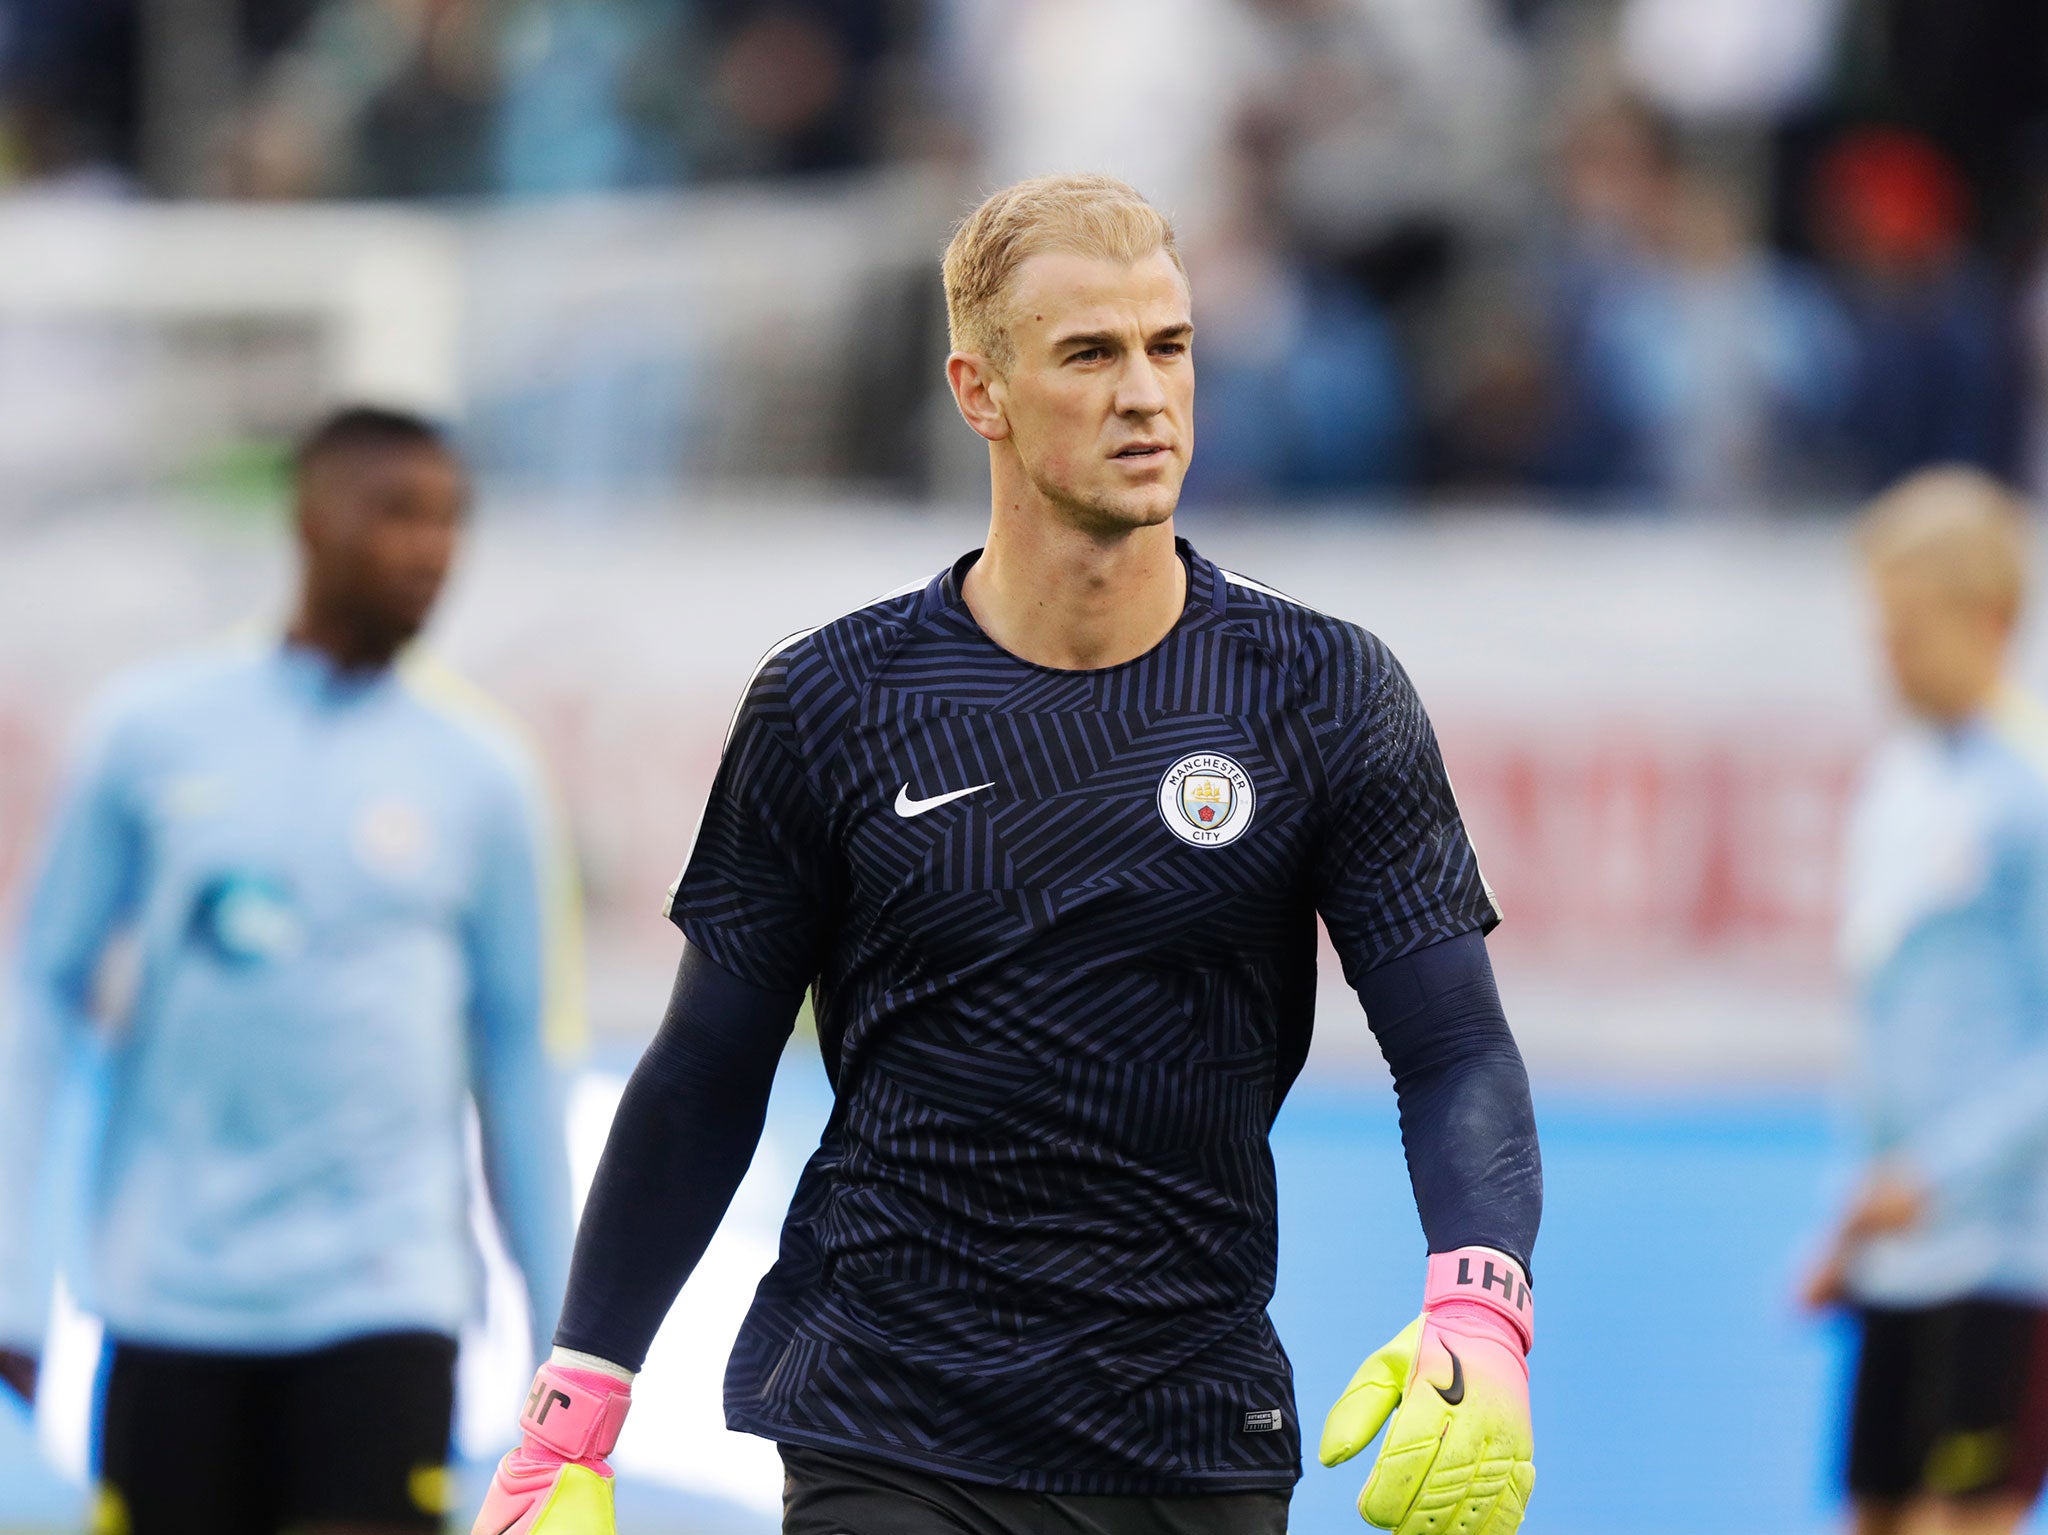 Joe Hart now faces the prospect of a season on the sideline under Pep Guardiola